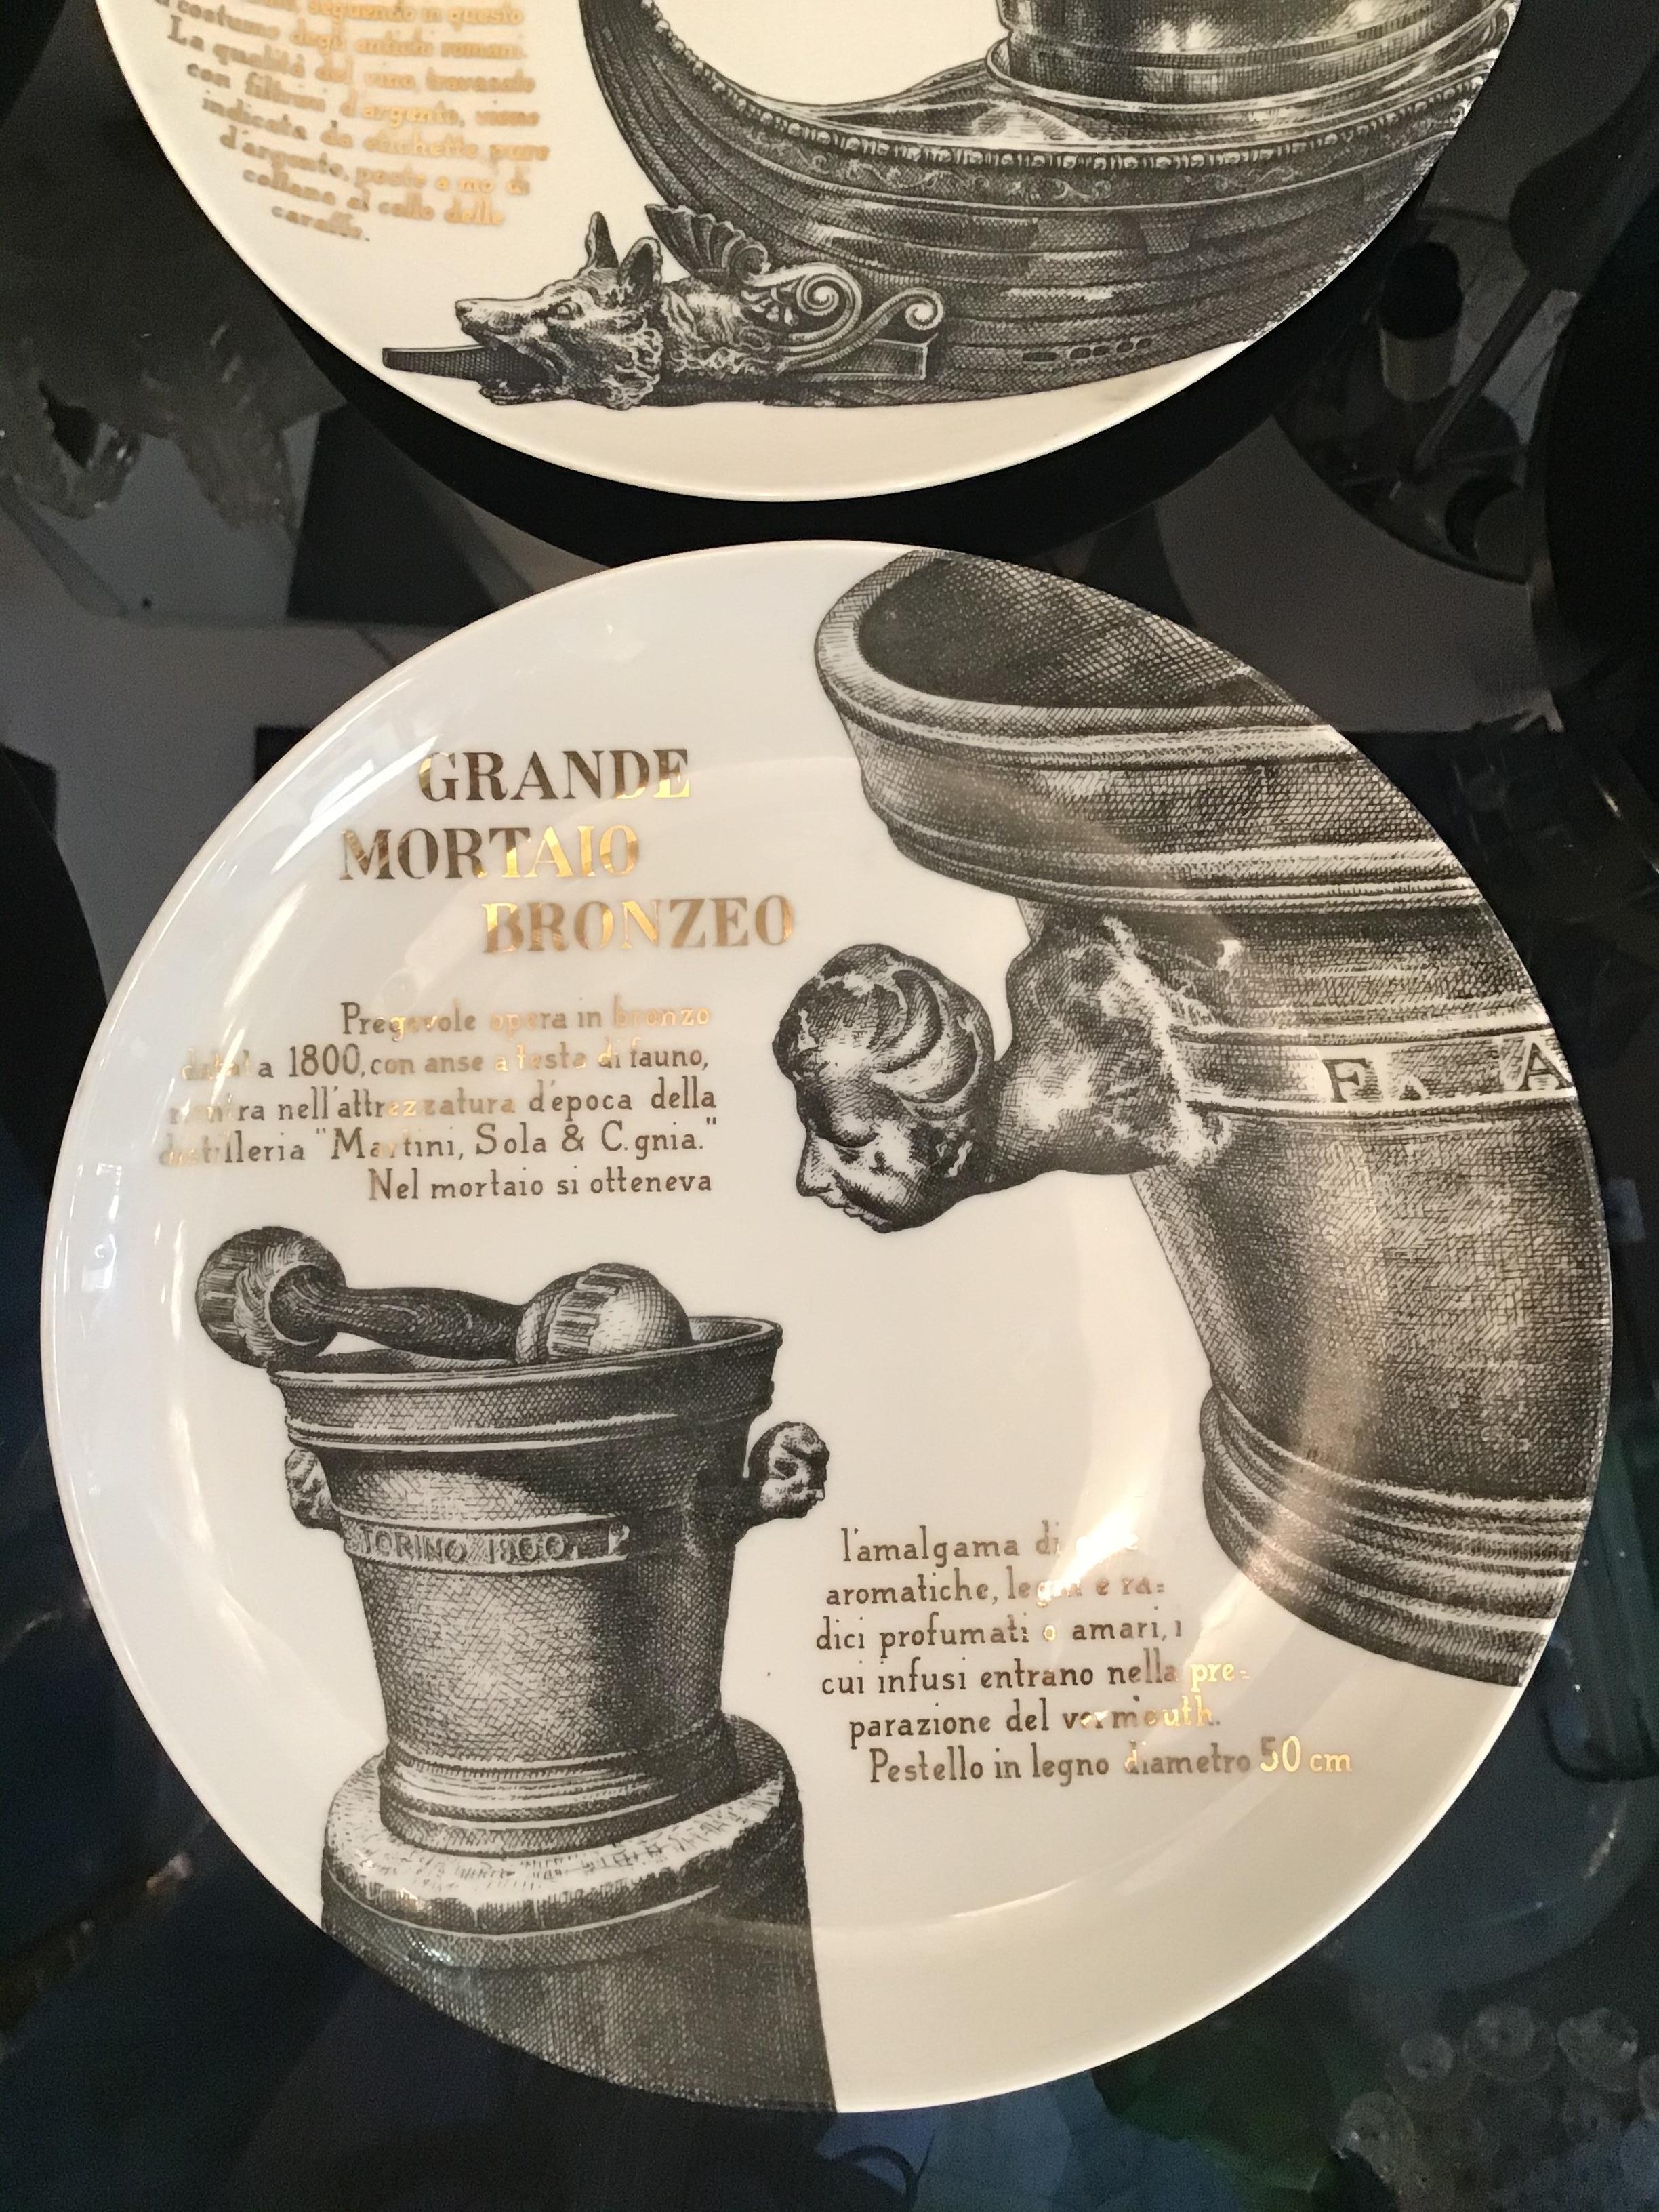 Fornasetti series of 6 plates for the Martini and Rossi of Turin inspired by the major pieces of his Pessione Museum.